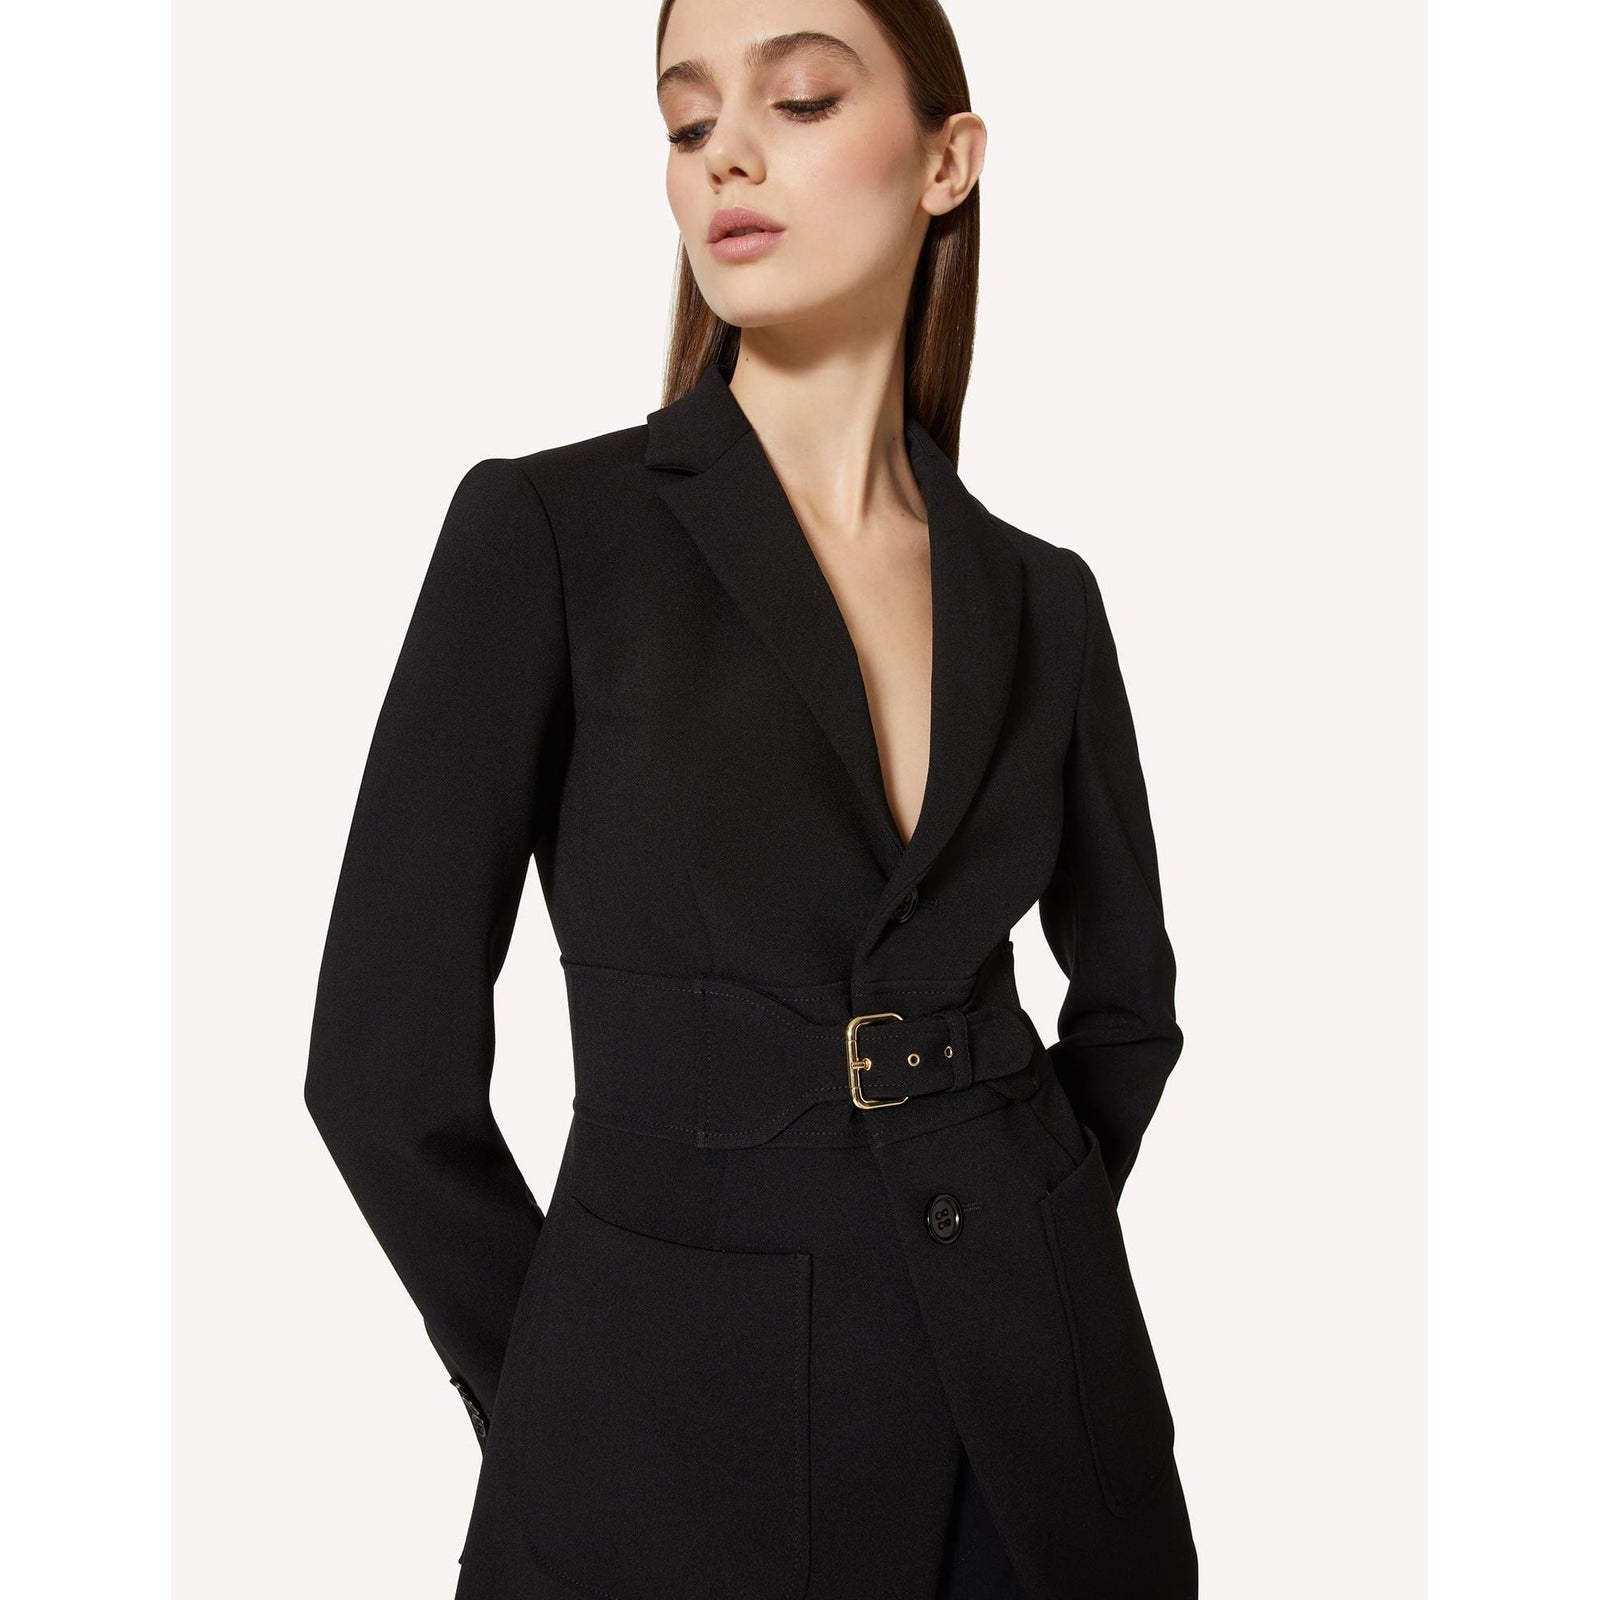 RED VALENTINO CADY JACKET WITH BELT DETAIL - Yooto